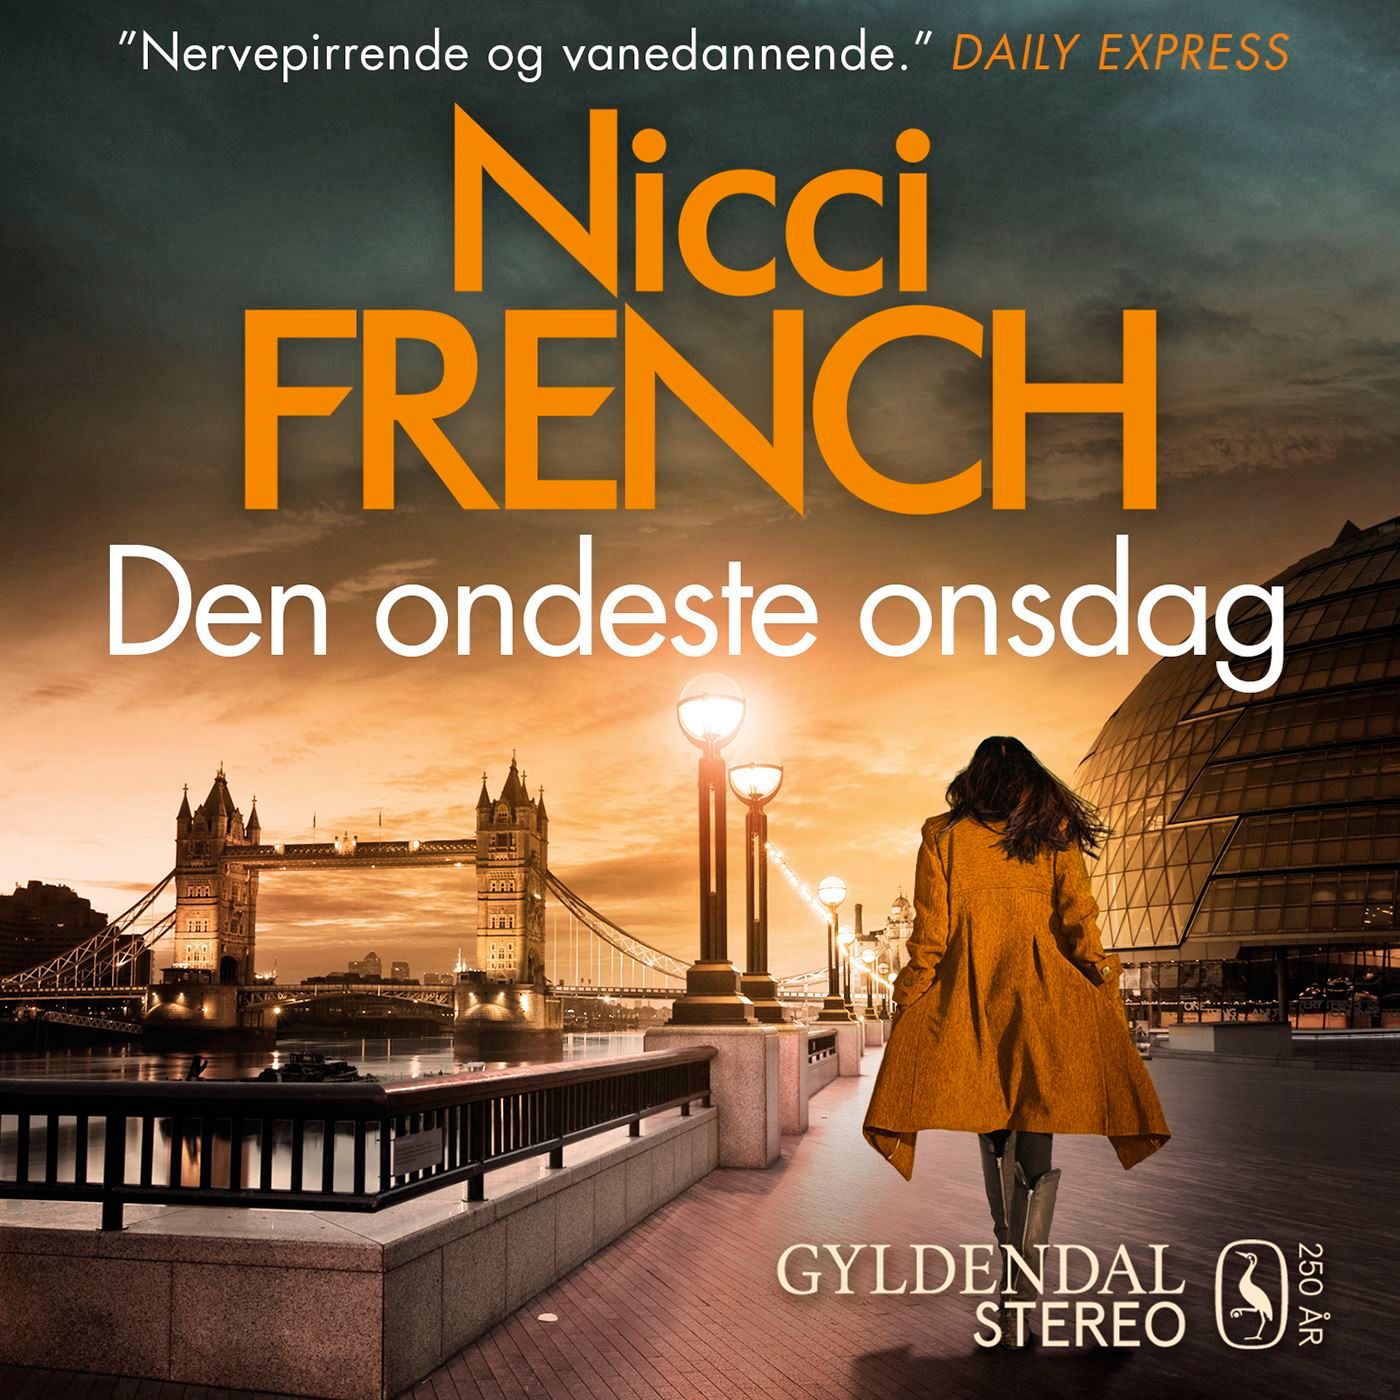 Den ondeste onsdag, audiobook by Nicci French